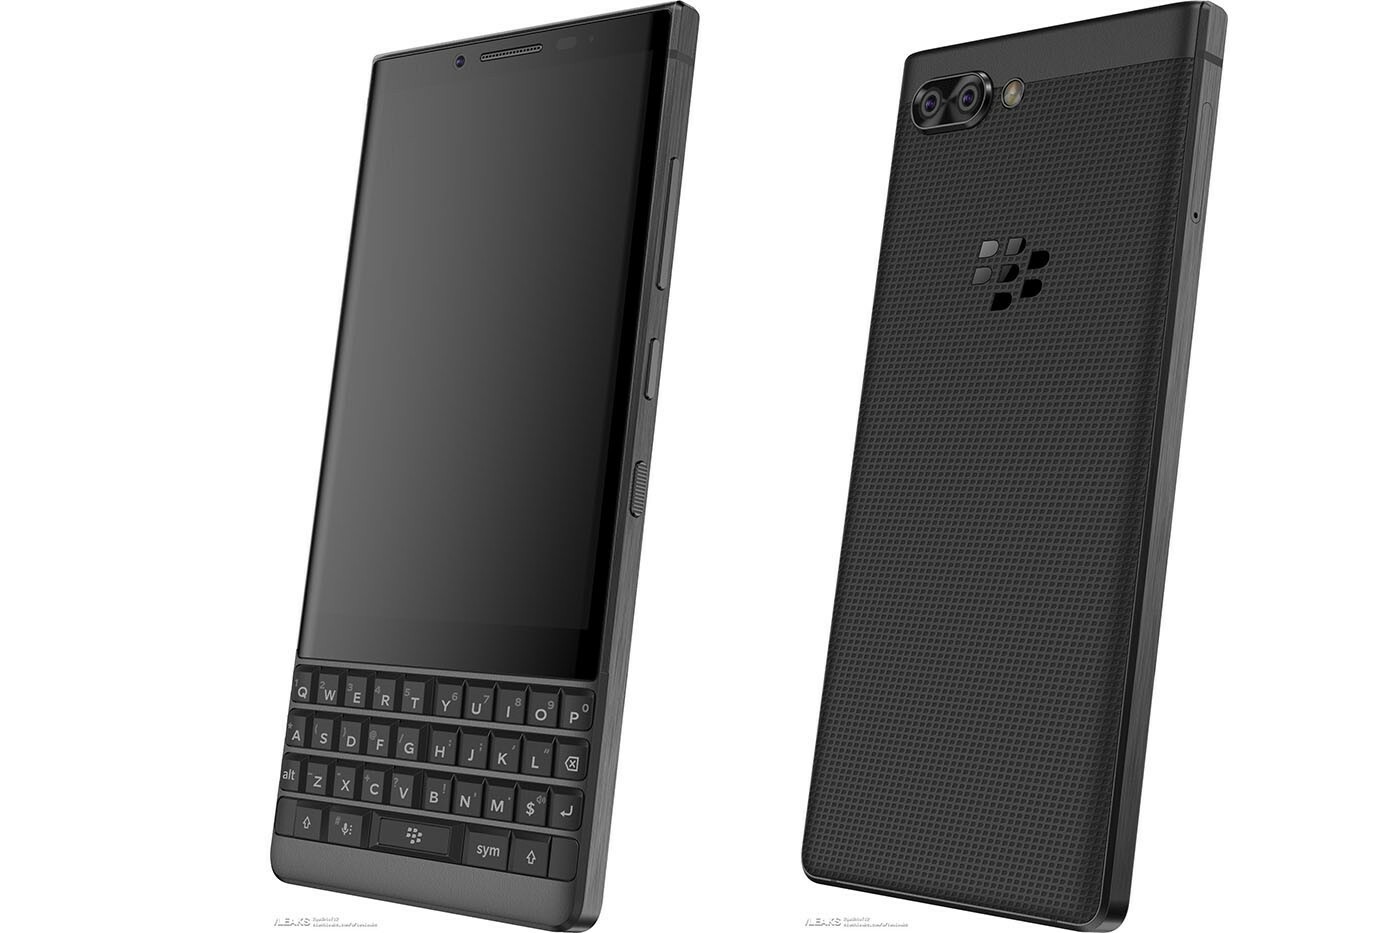 Is there anything else I should know about the BlackBerry Key2?